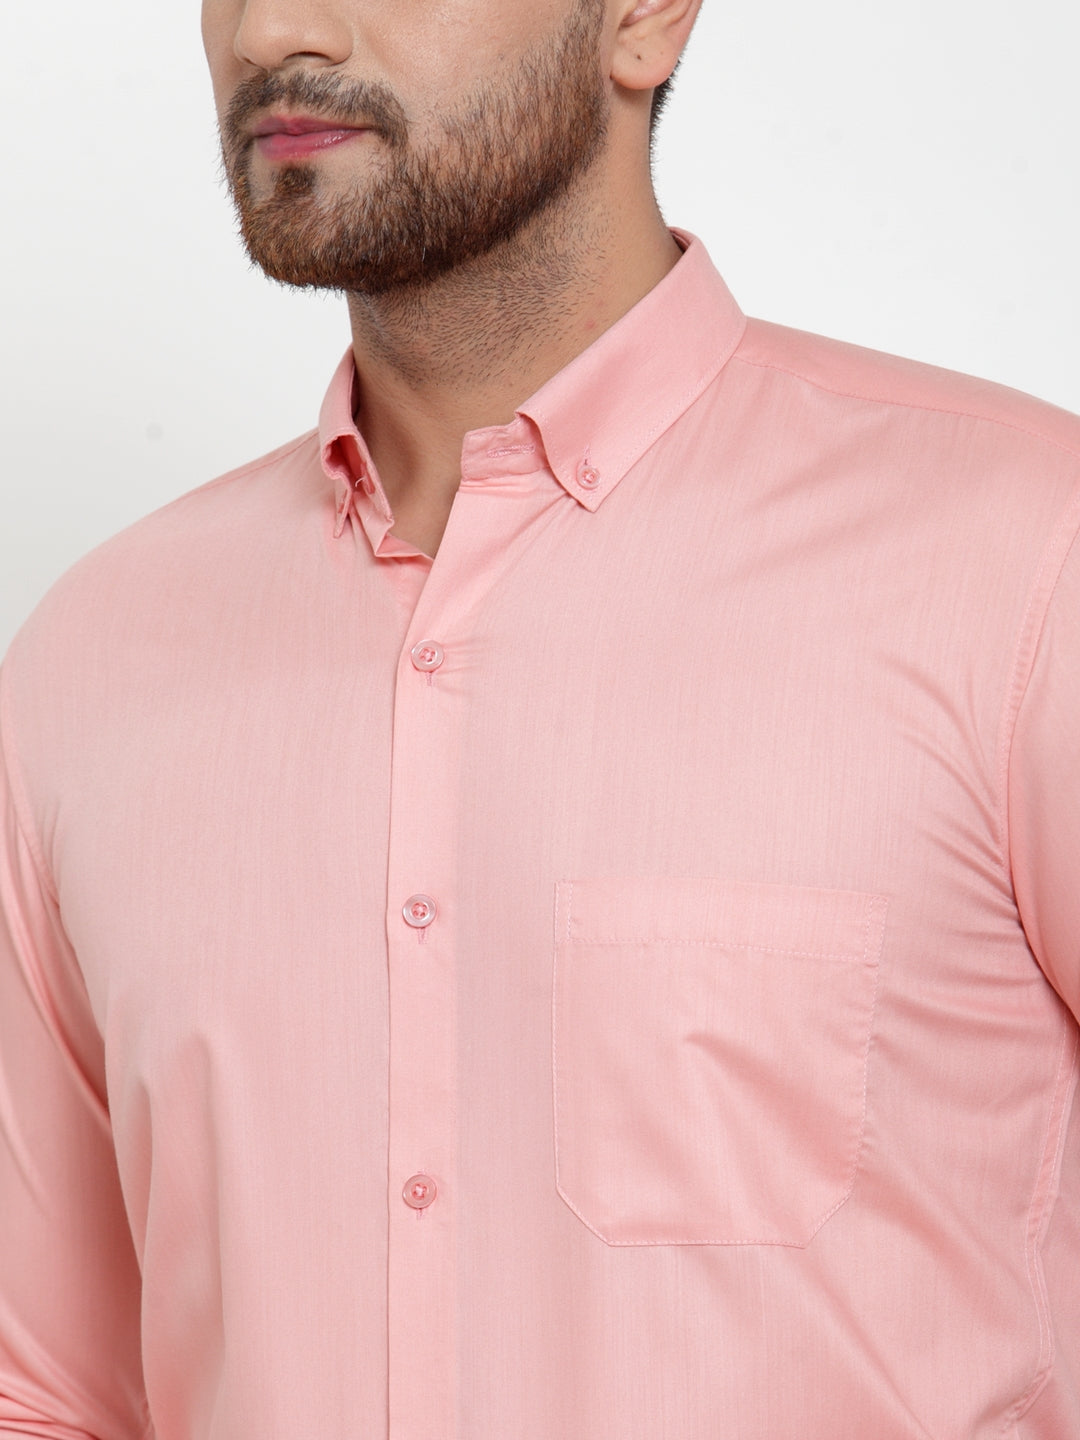 Men's Red Cotton Solid Button Down Formal Shirts ( SF 713Coral ) - Jainish